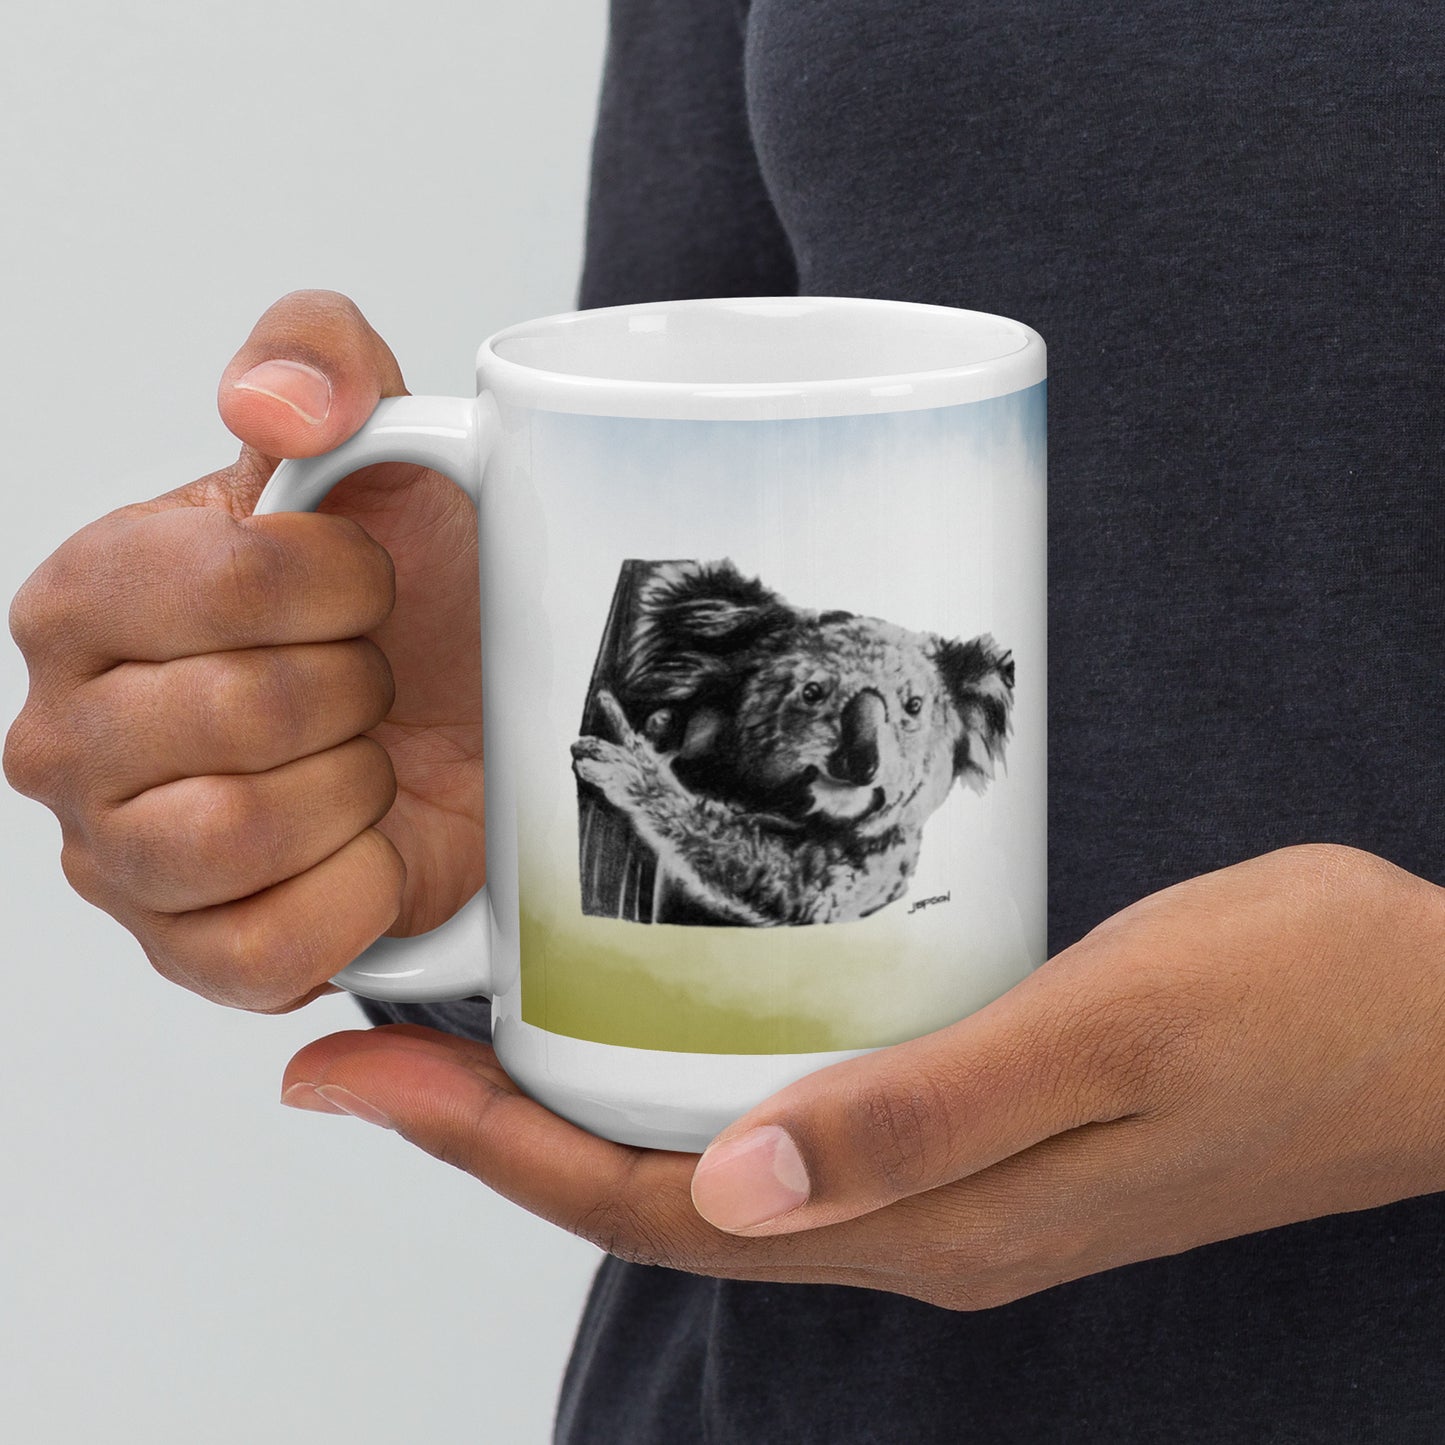 This "Koala White Glossy Mug (B)" is from a drawing of mine created with a graphite pencil. It has been digitally optimized and transferred to a 15oz white glossy mug.